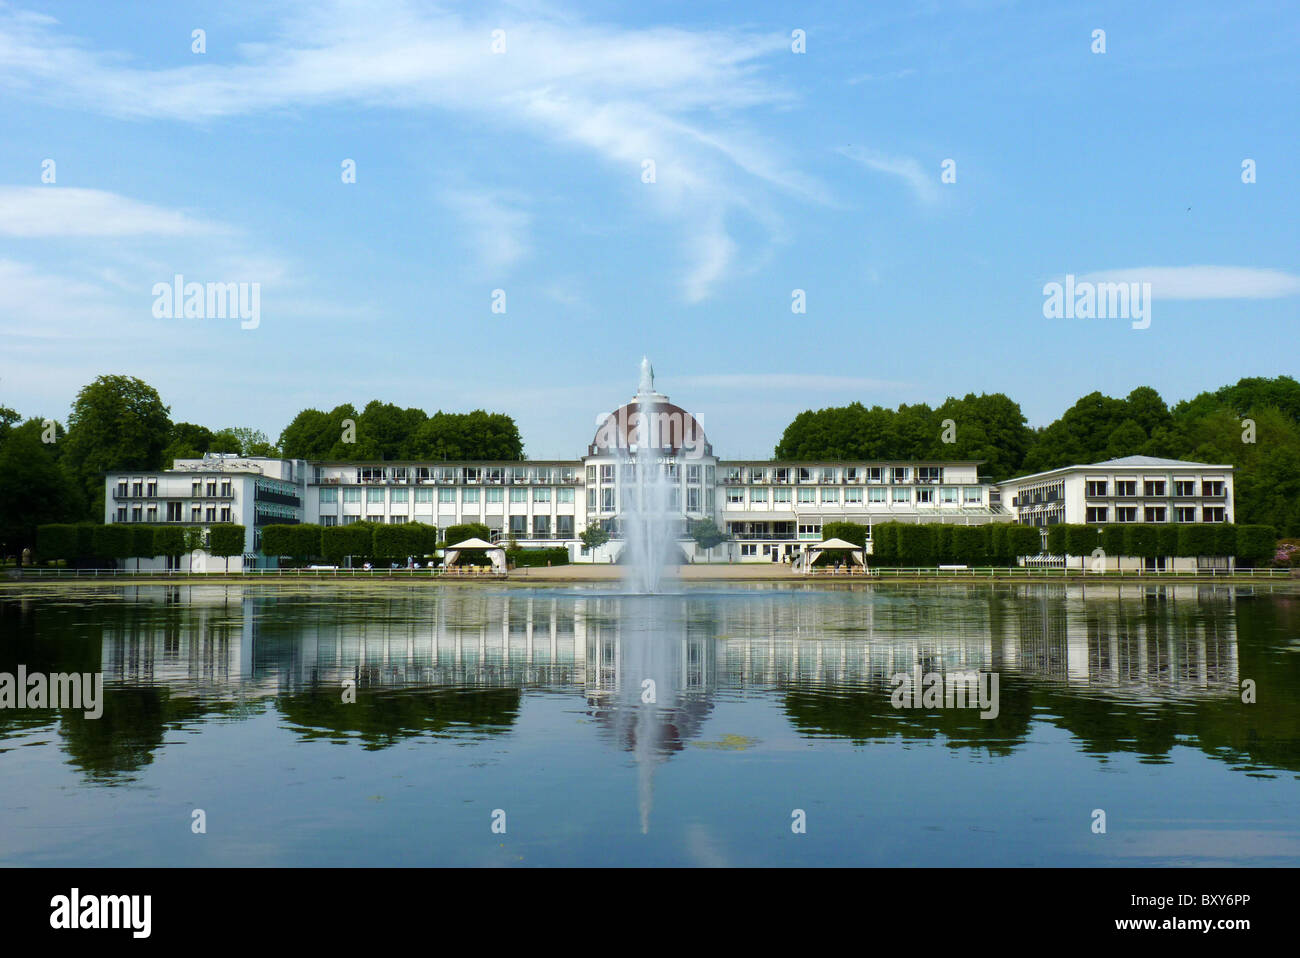 Park Hotel and Hollersee Lake. Bremen, Germany. Stock Photo